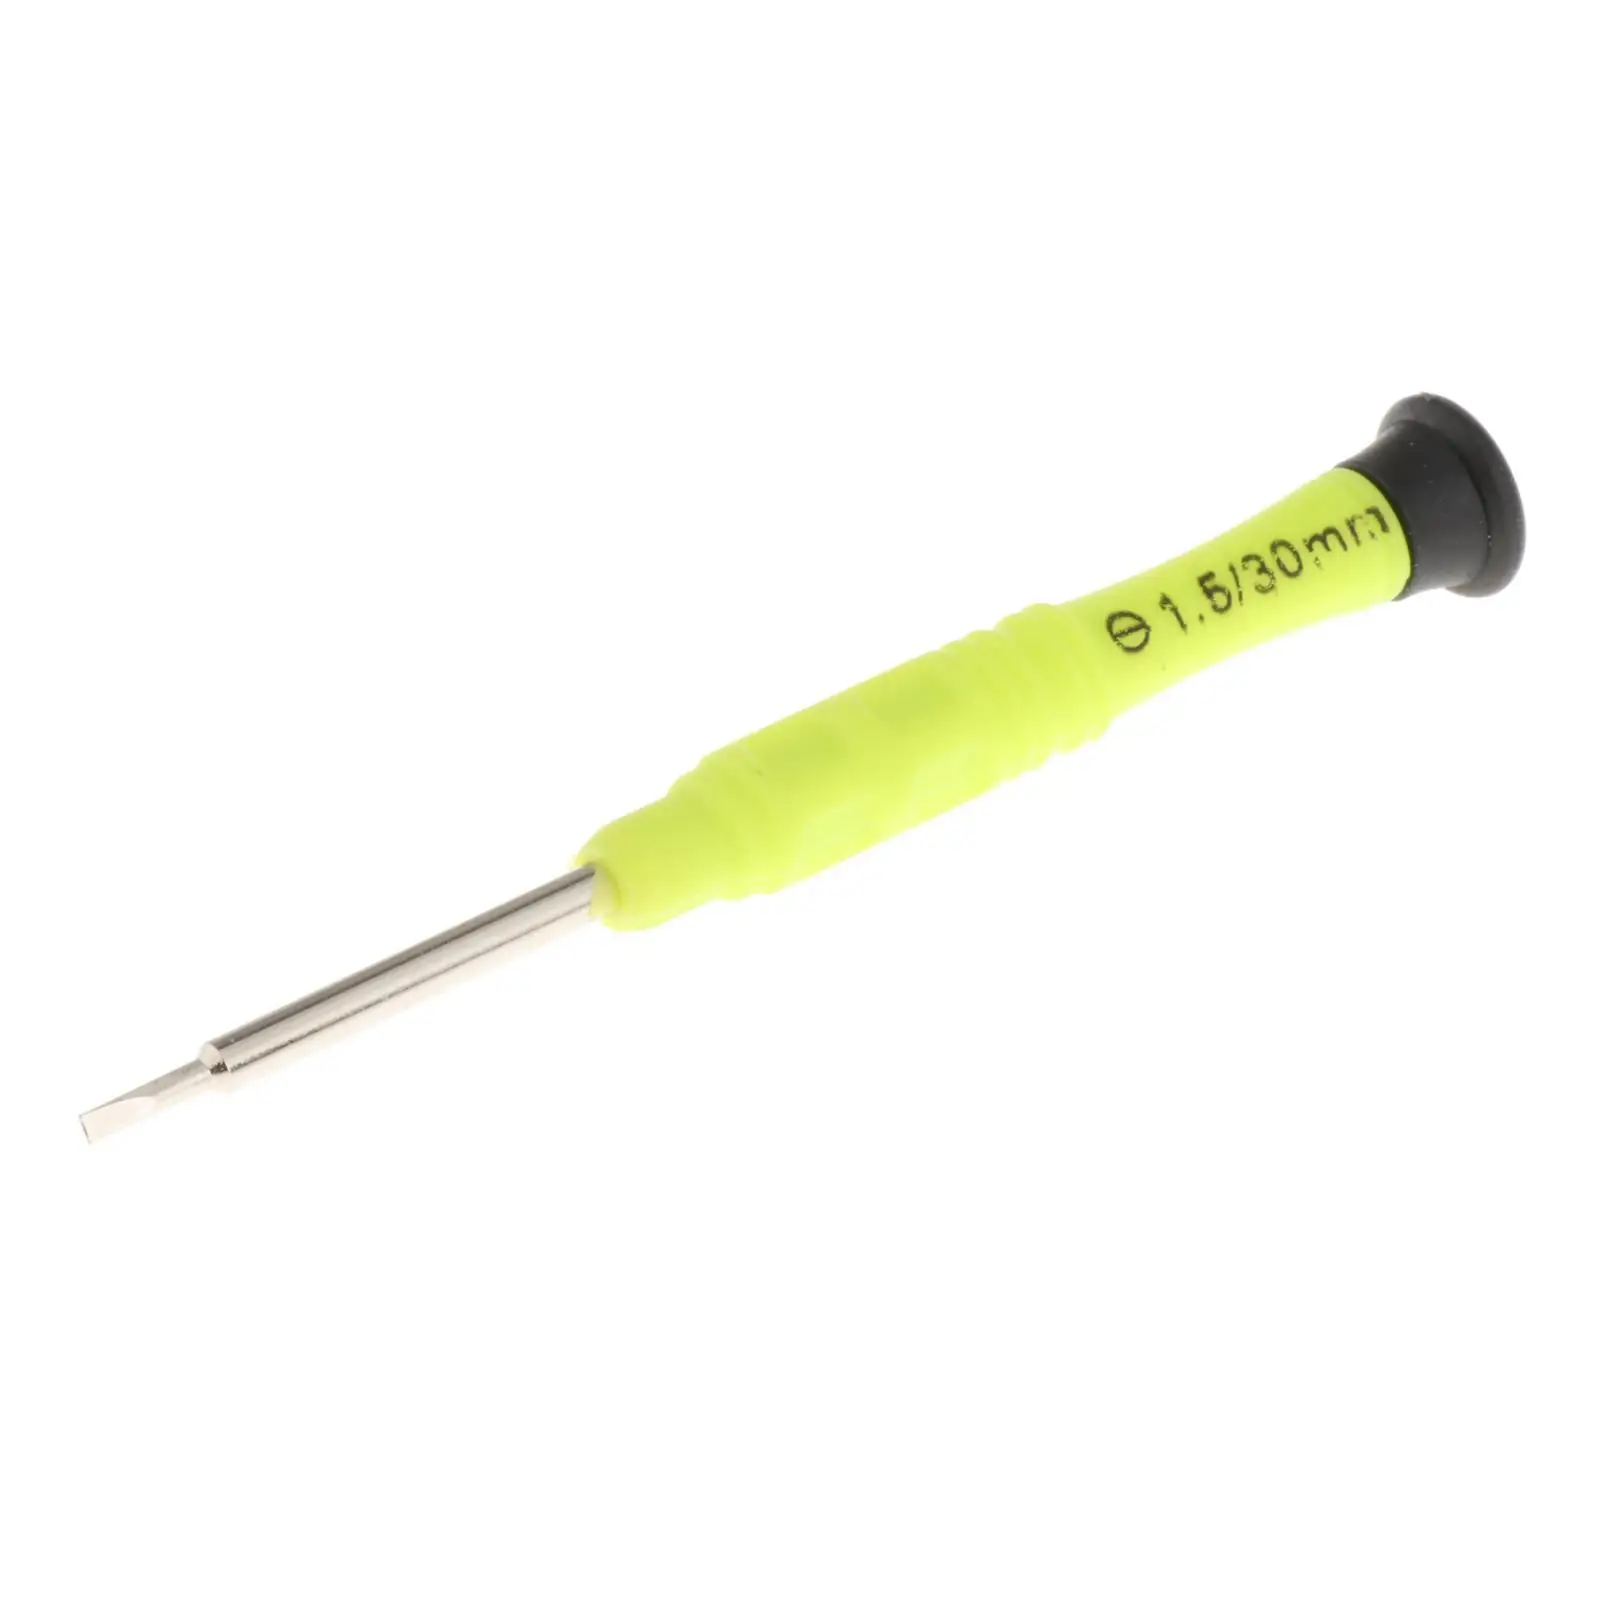 Fencing Screwdriver Durable Hand Tools for Foil Competitions